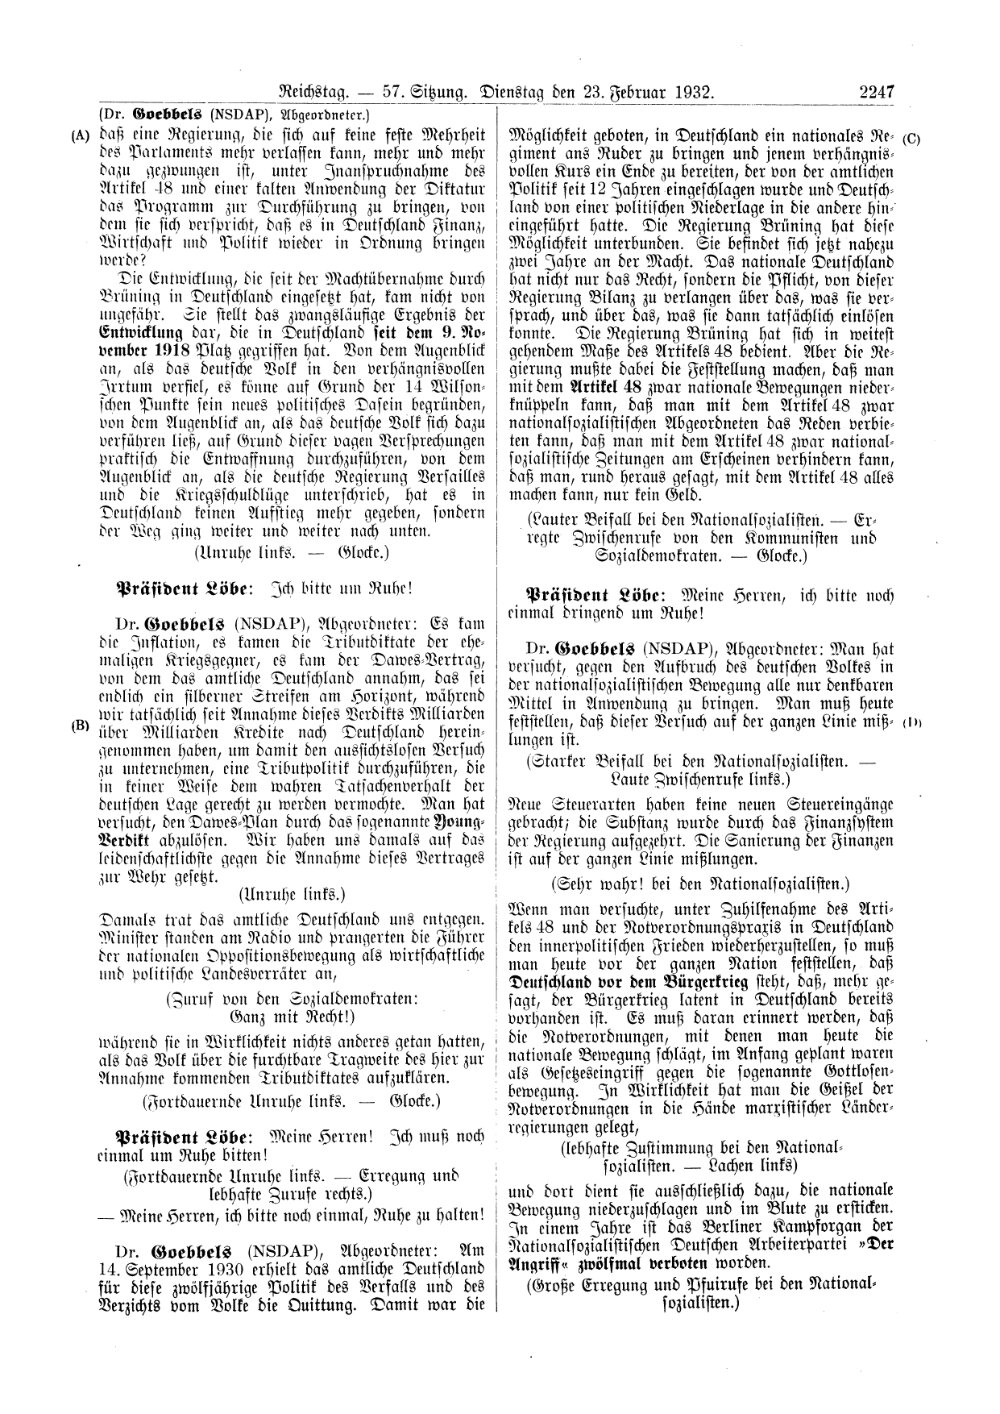 Scan of page 2247